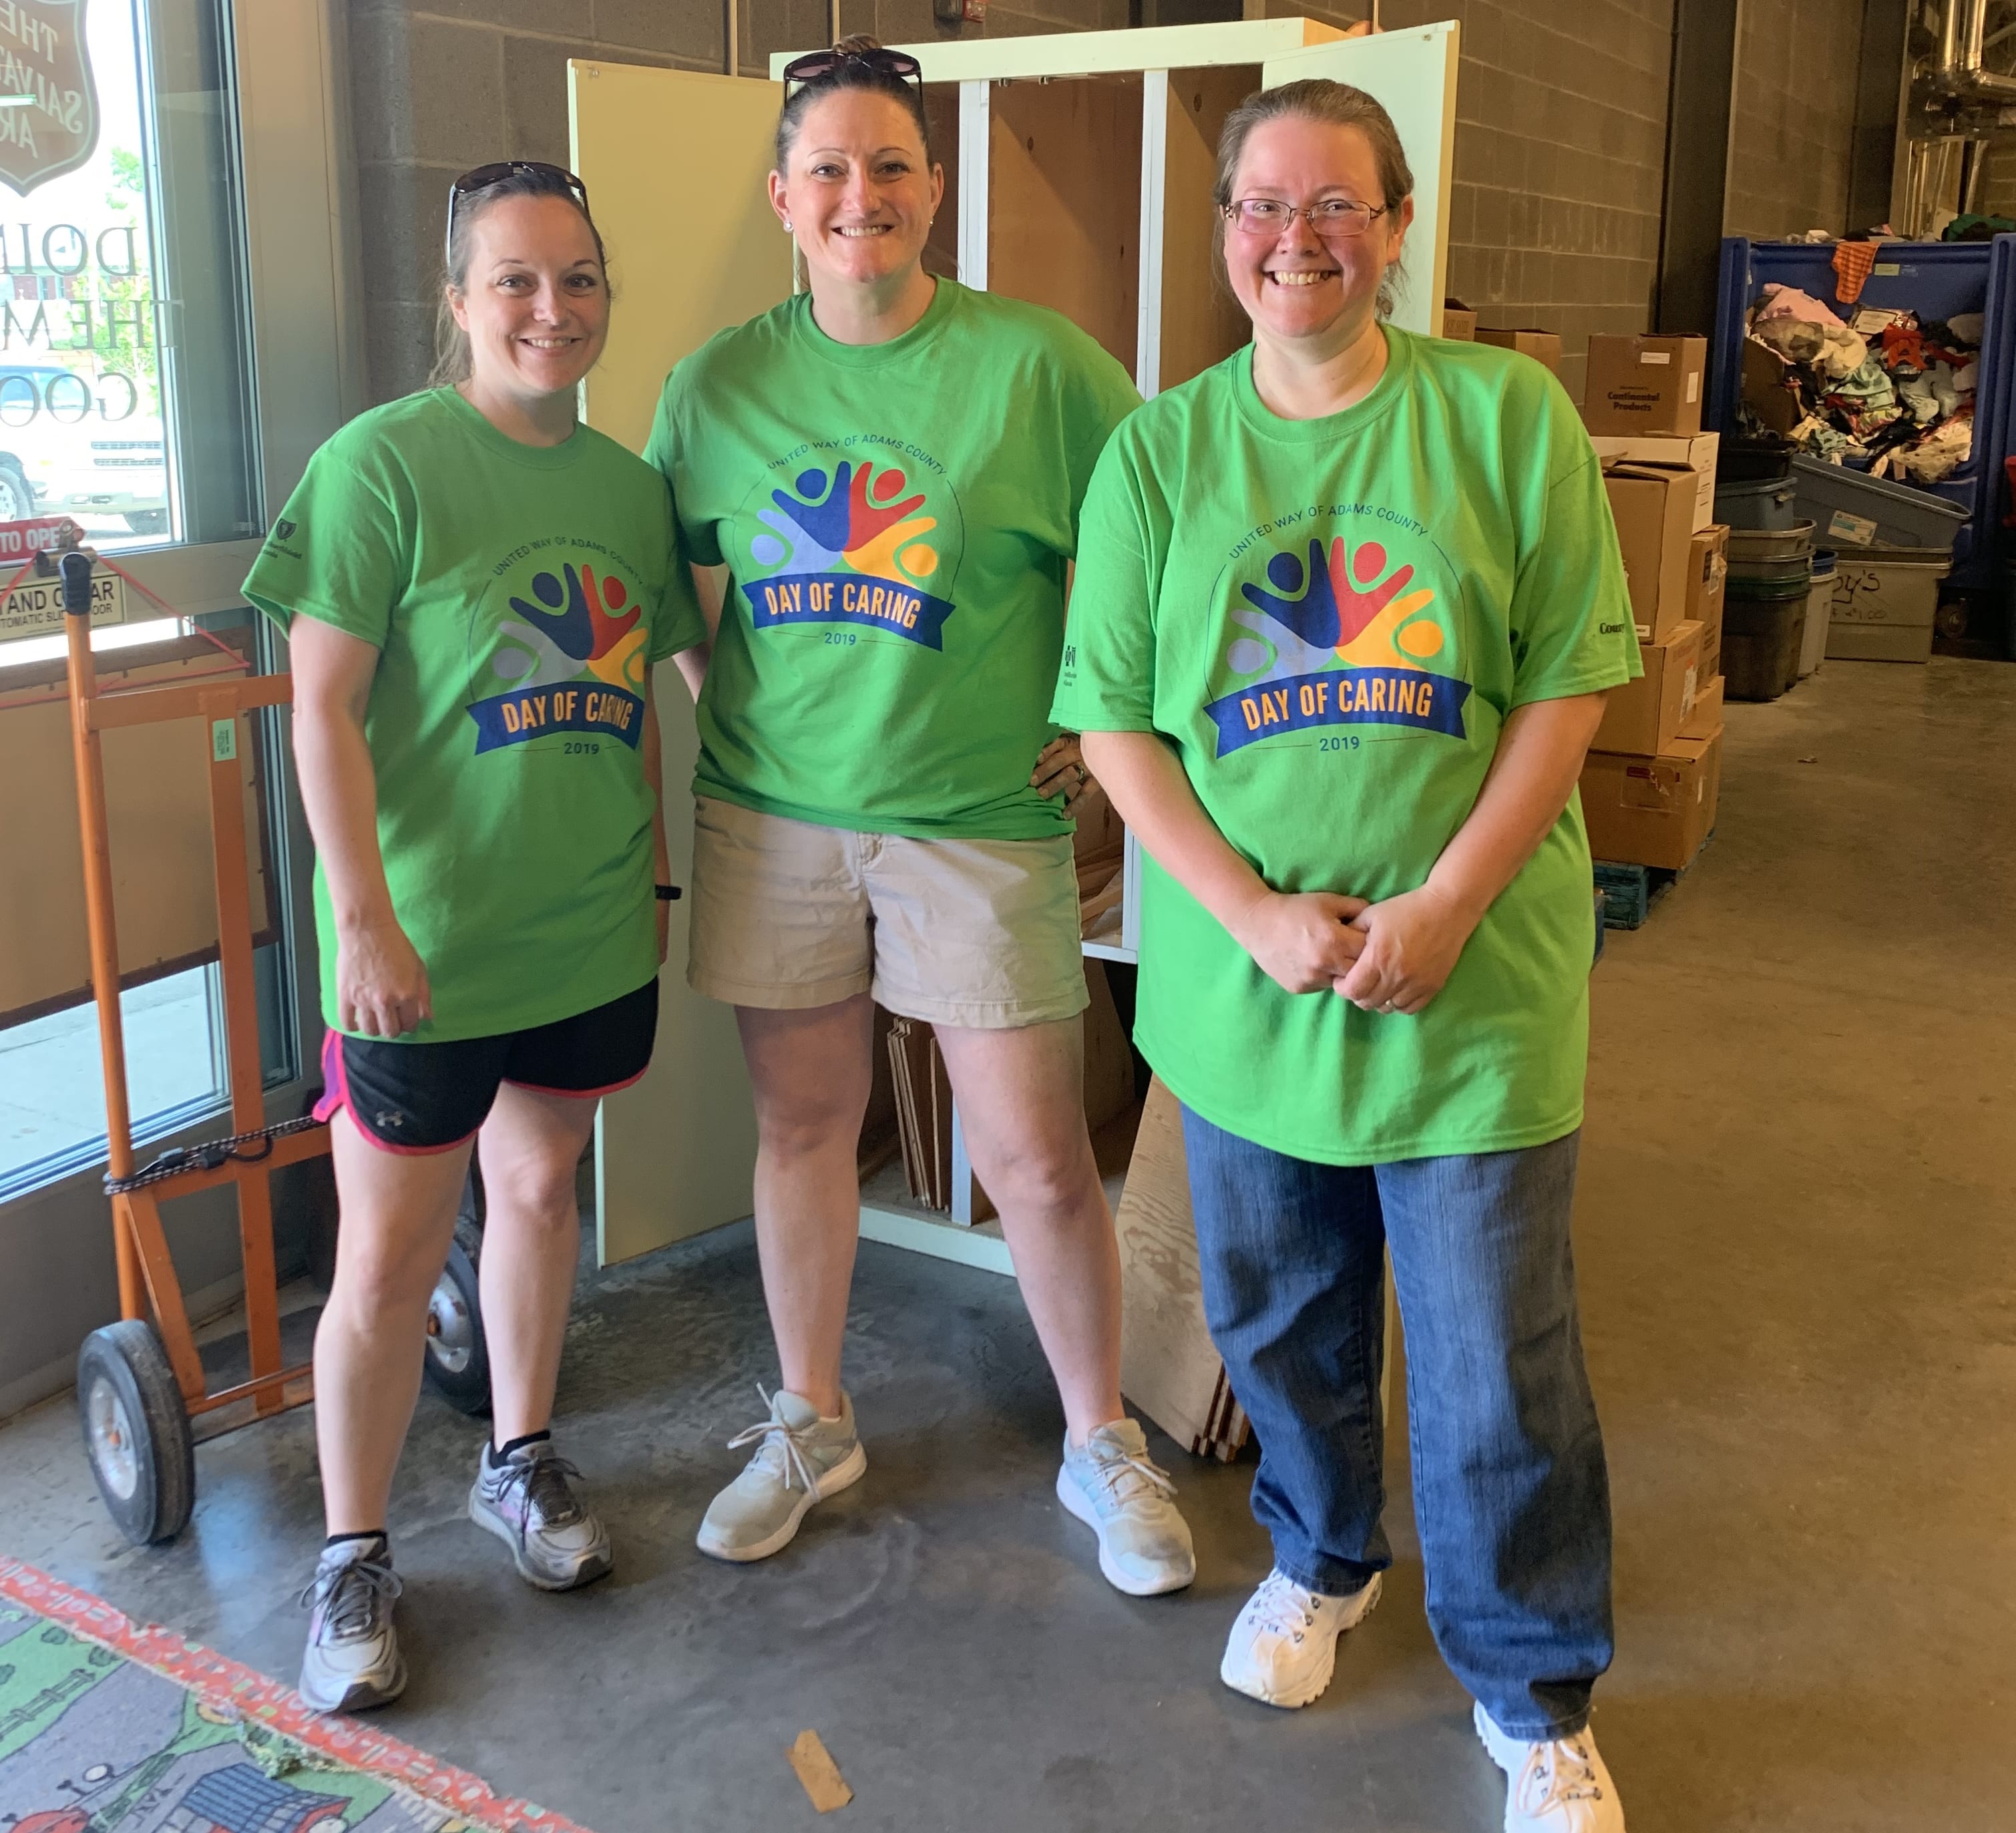 2019 United Way Day of Caring